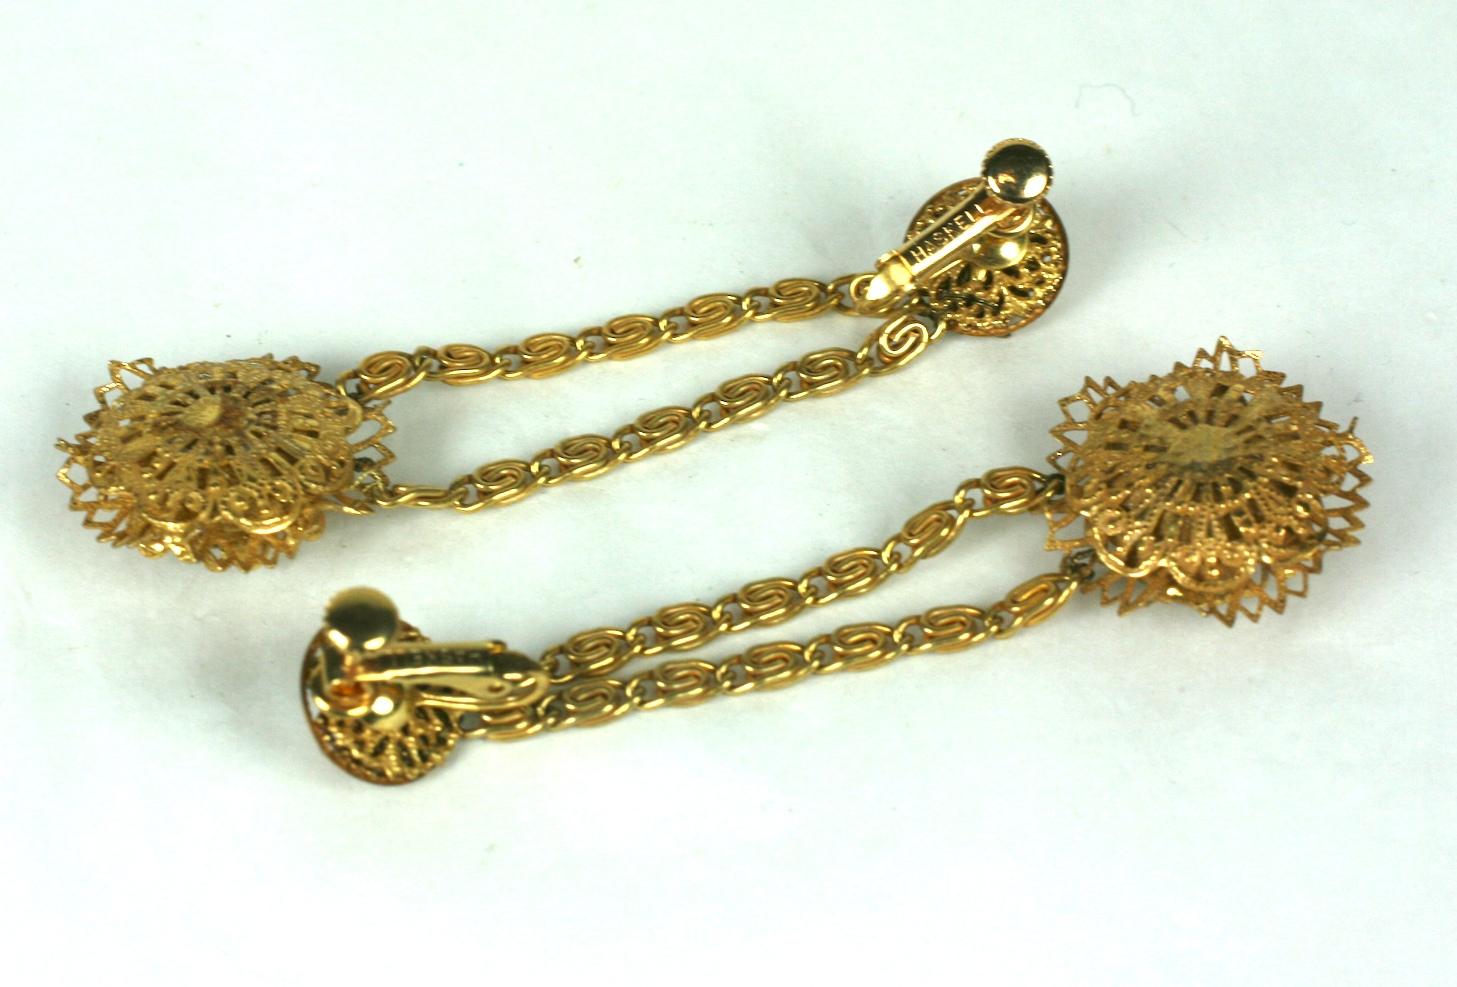 Women's Miriam Haskell Victorian Revival Earclips For Sale